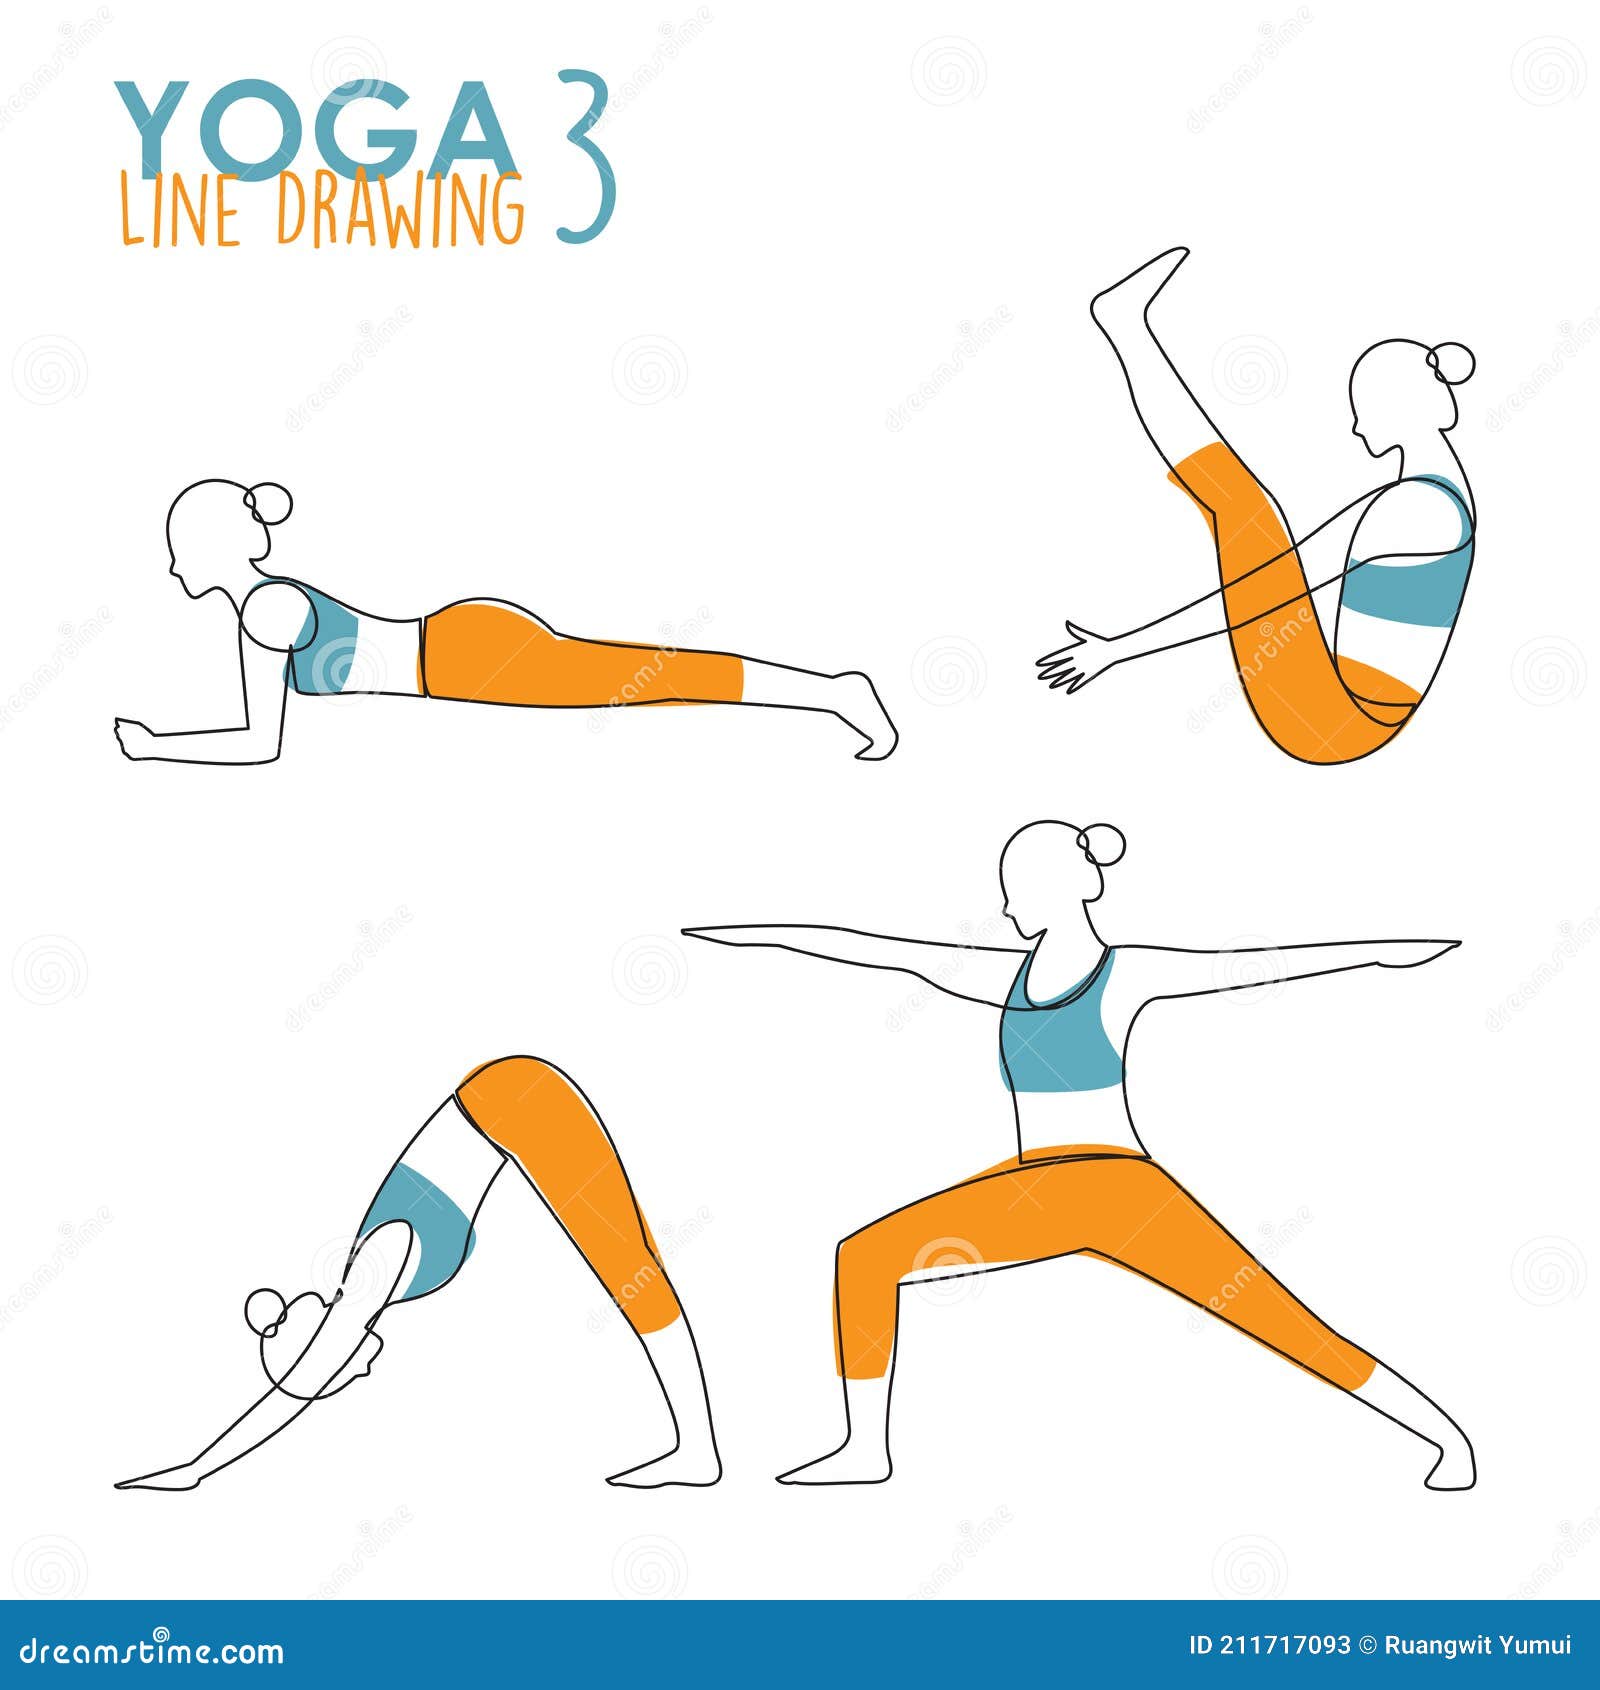 90+ Yoga Line Art Stock Videos and Royalty-Free Footage - iStock | Yoga  line art icons, Woman yoga line art